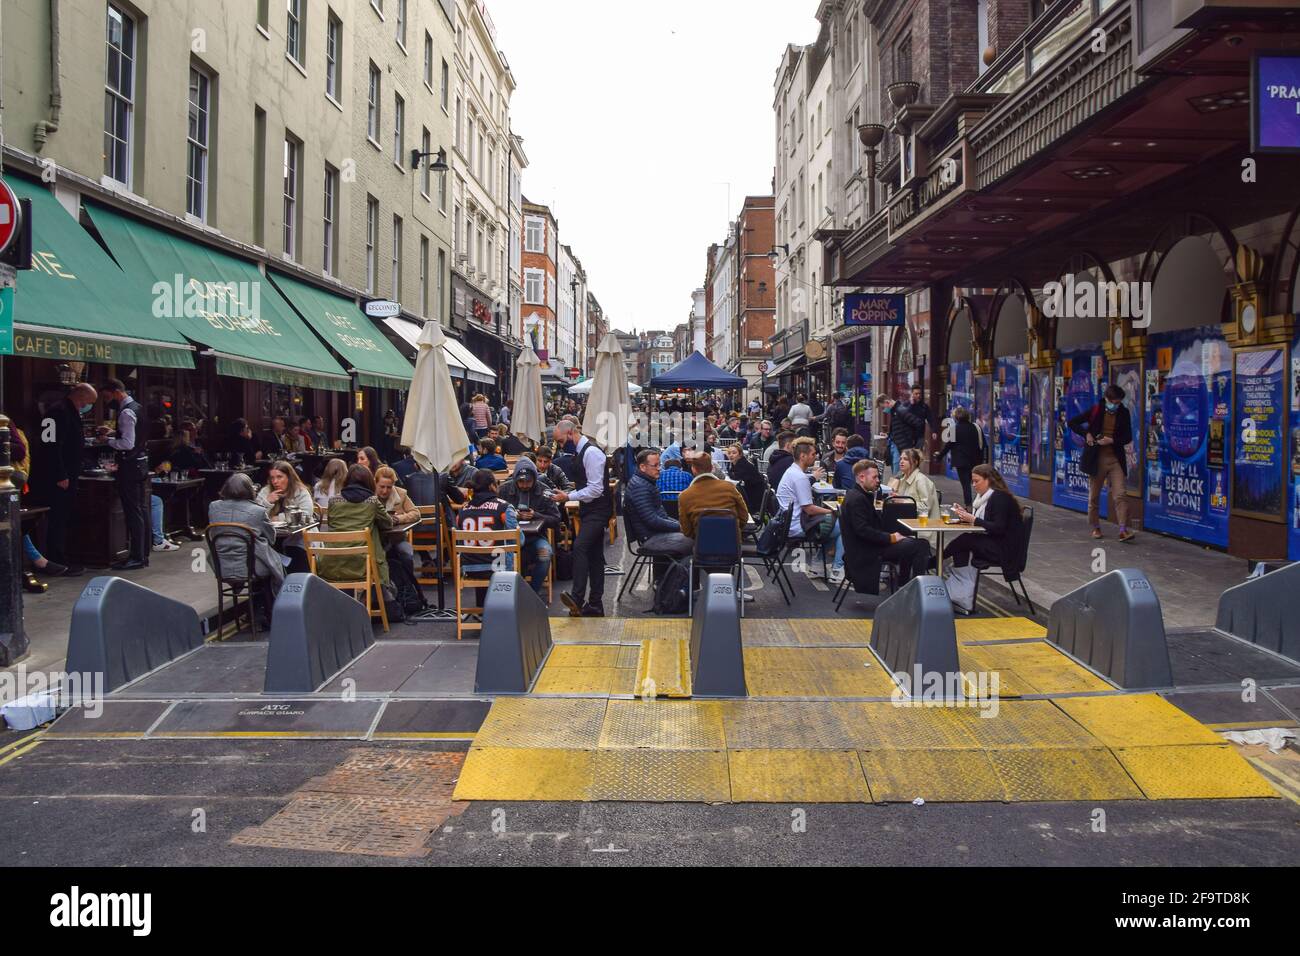 London, United Kingdom. 20th April 2021. Busy restaurants and bars in Old Compton Street. Several streets in Soho have been blocked for traffic to allow outdoor, al fresco seating at bars and restaurants. Stock Photo